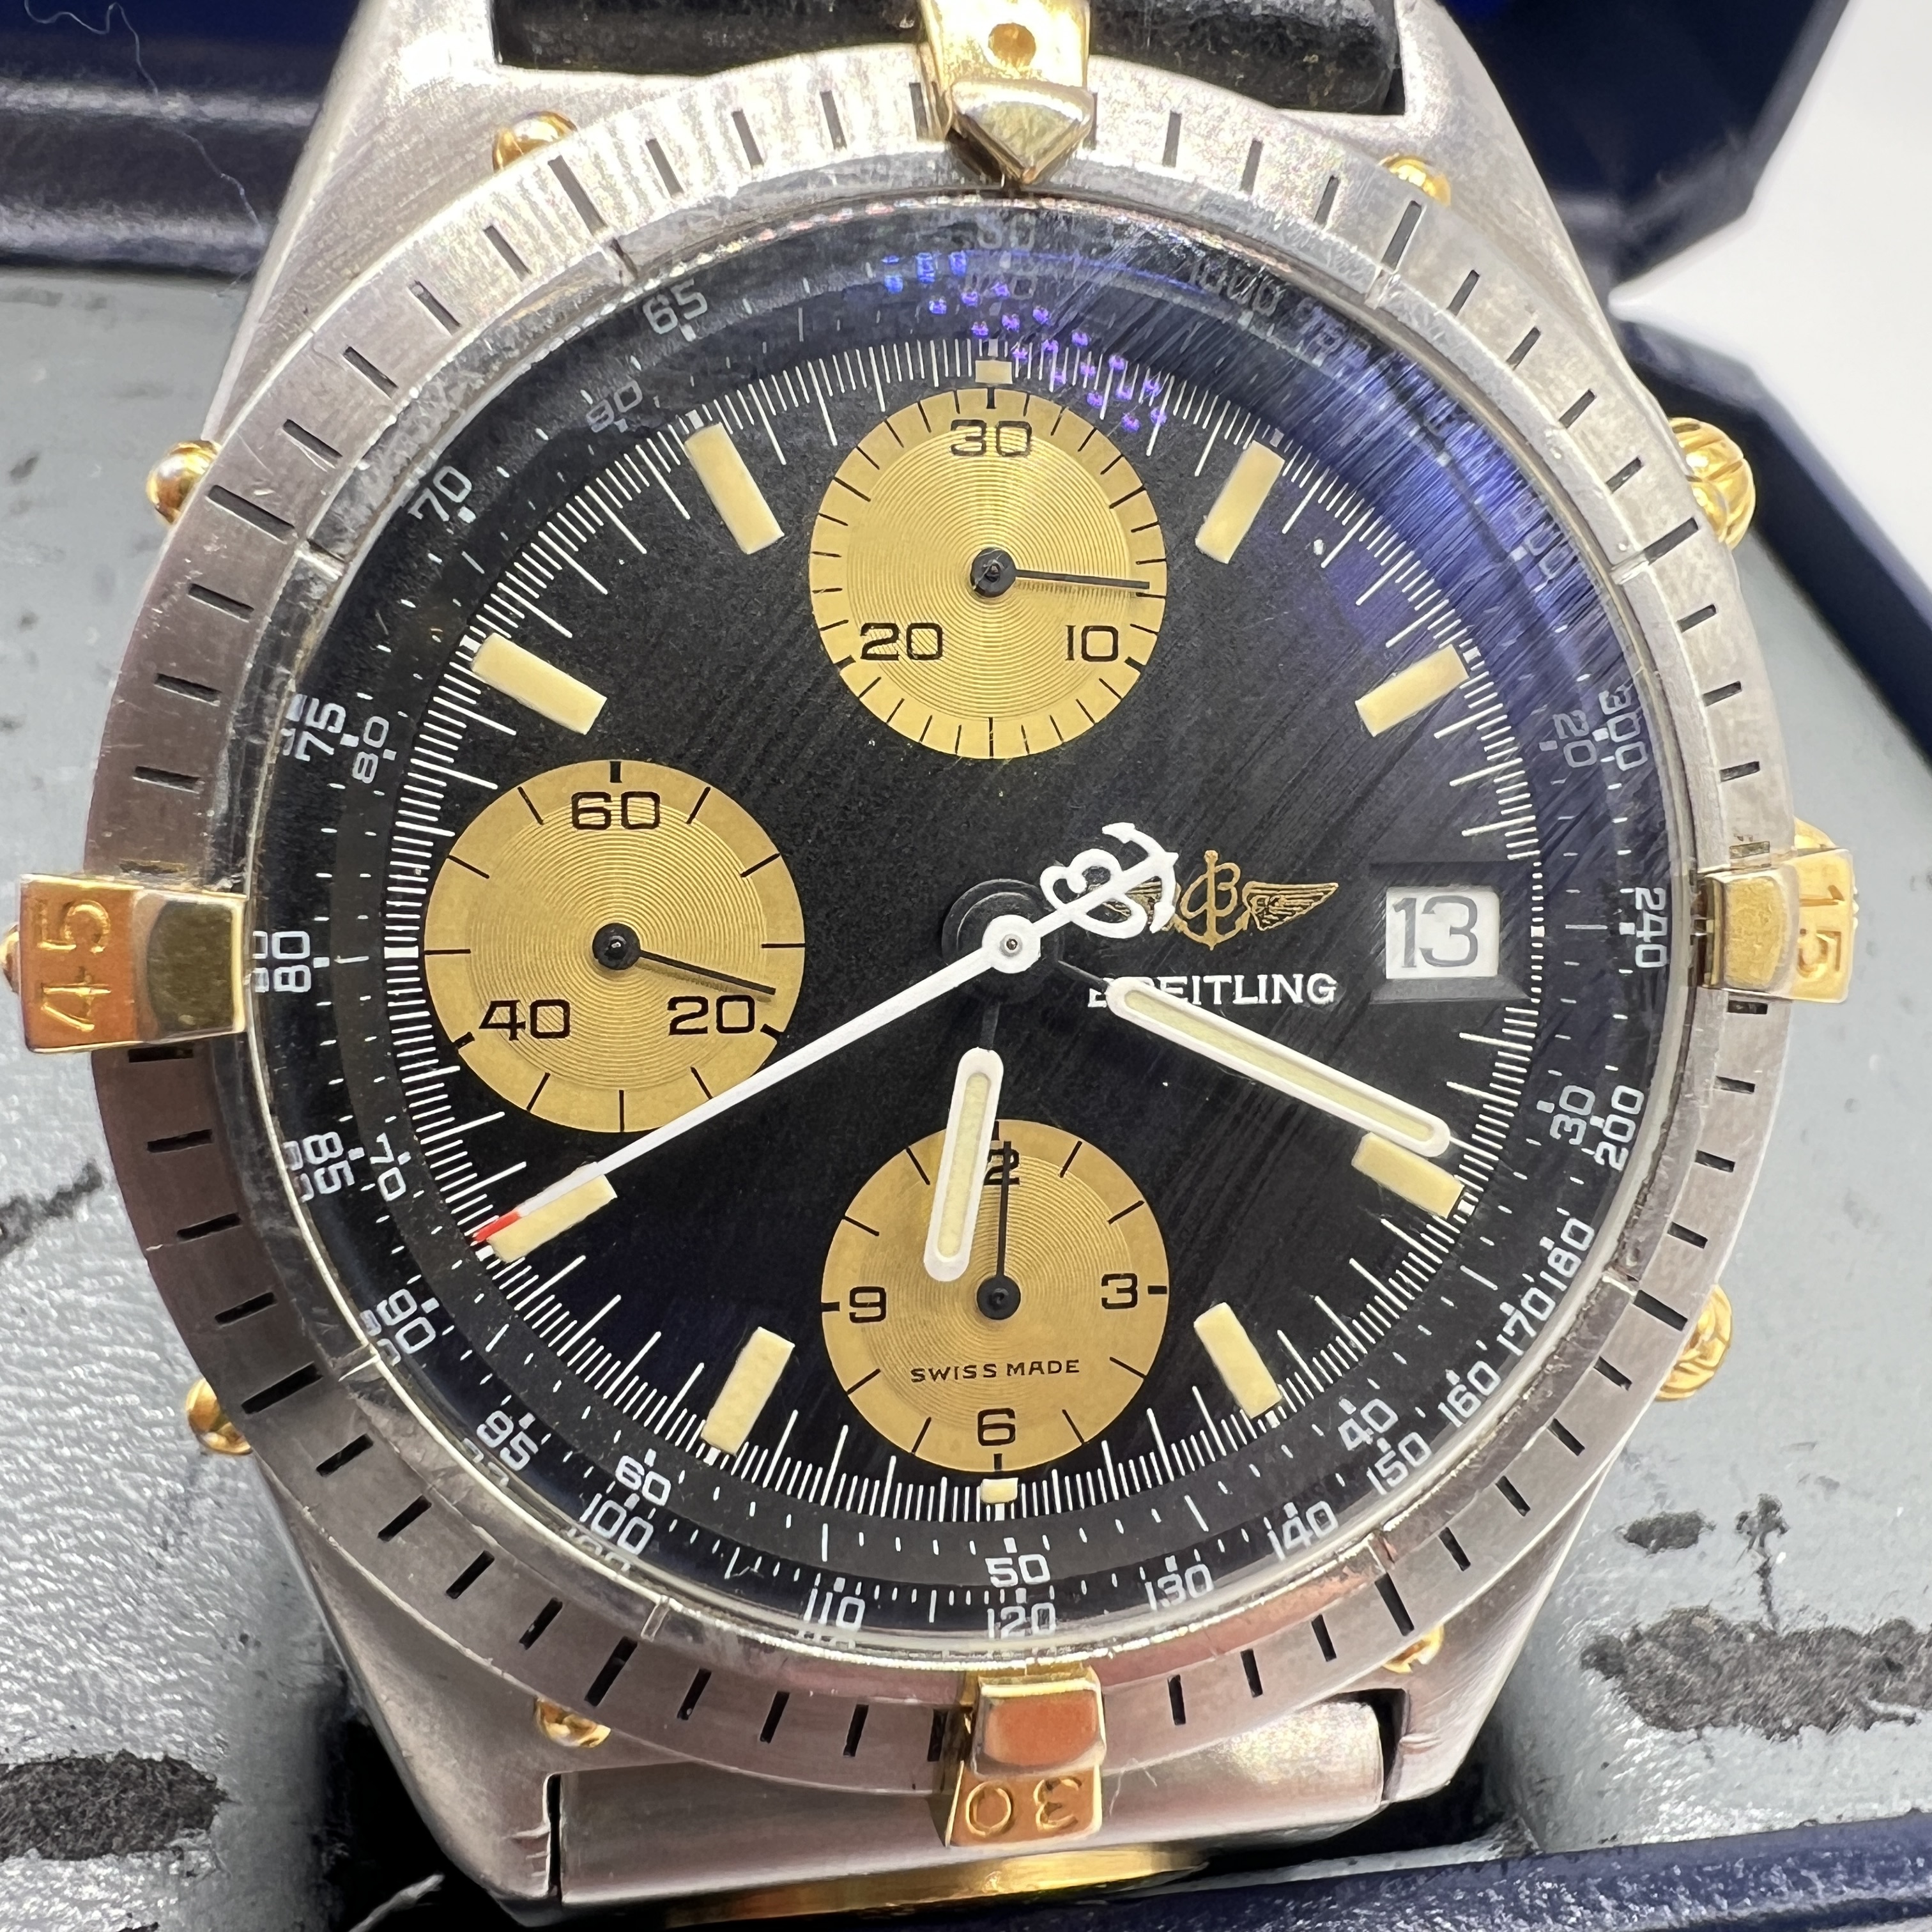 A Breitling chronograph stainless steel and gold watch - Image 11 of 11